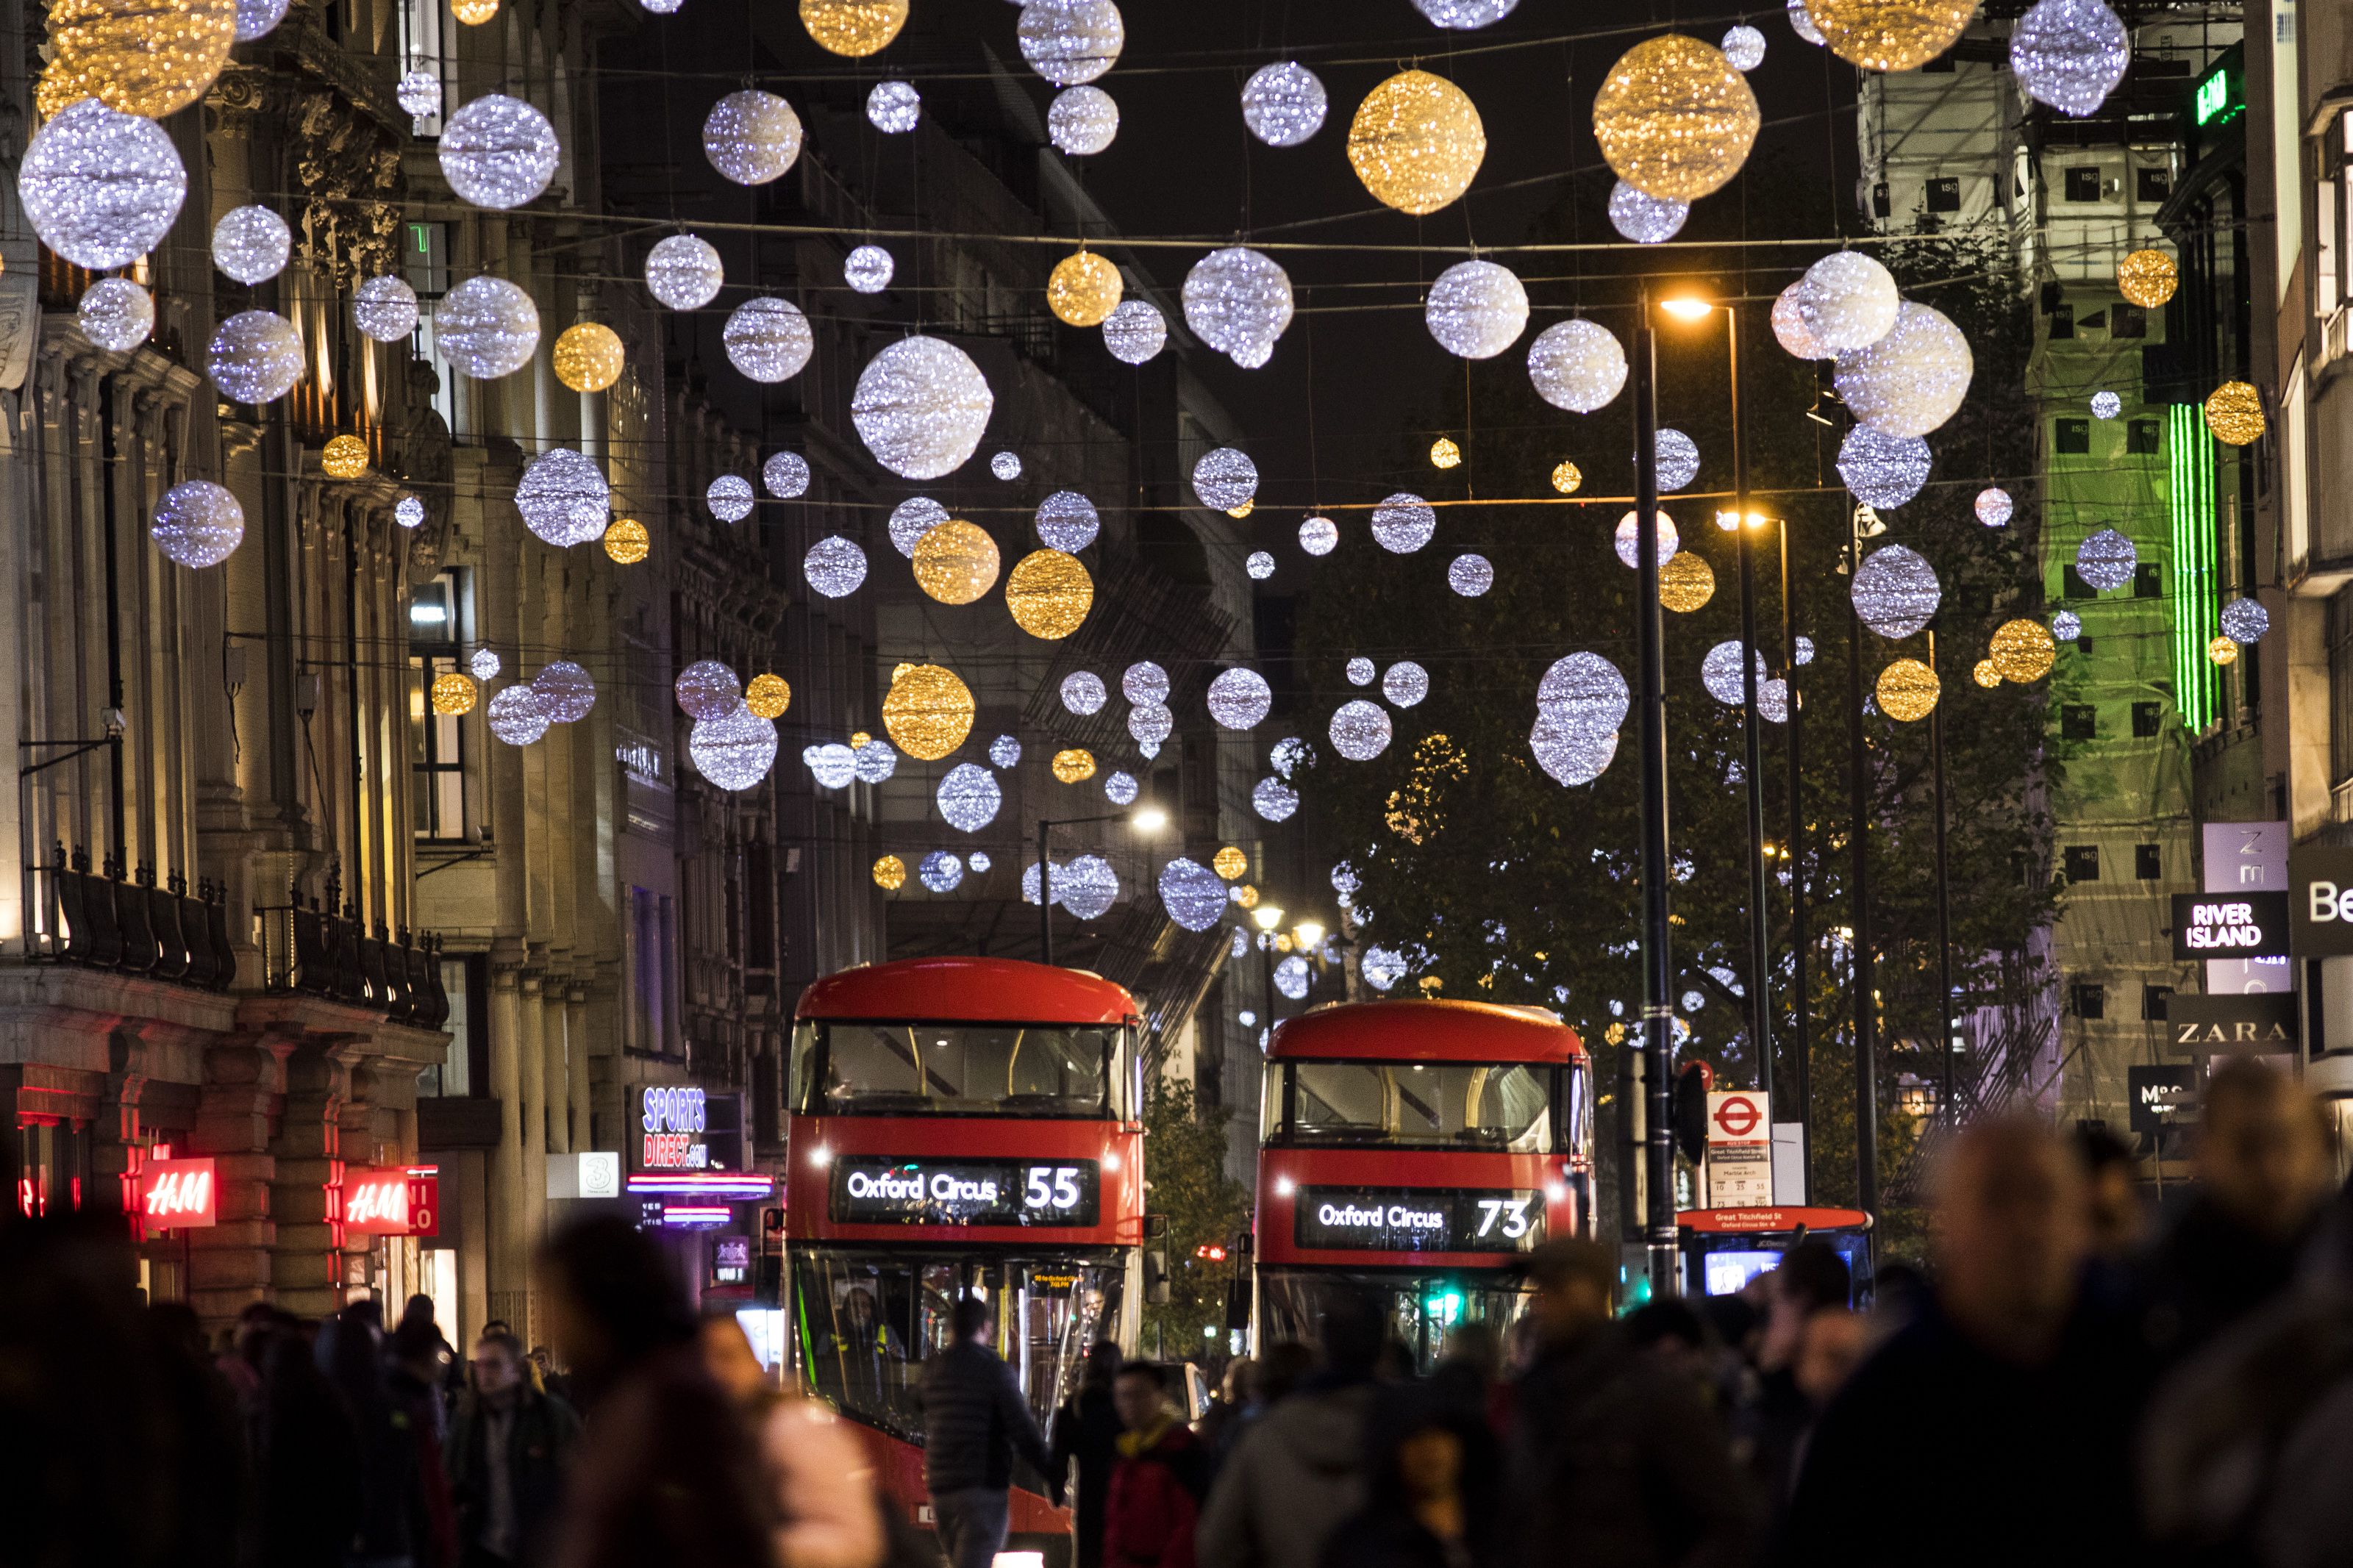 grundigt Dinkarville Definition Oxford Street Christmas Lights 2019: Switch On Date, New Lights